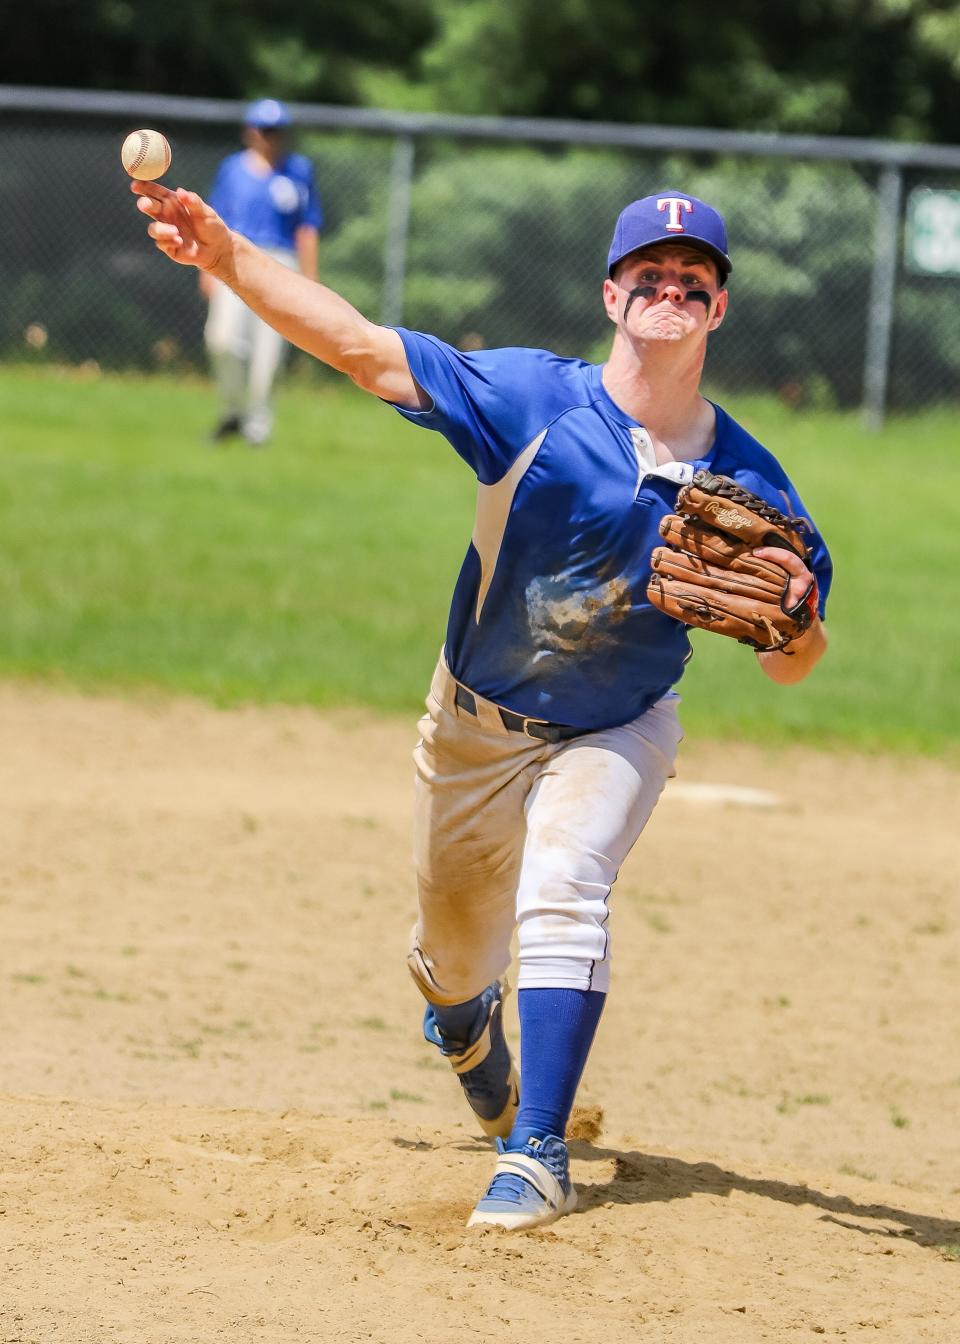 Brockton's Richie Stappen pitches in Greater Brockton Baseball League action at Hutchinson Field on Saturday, July 8, 2023.